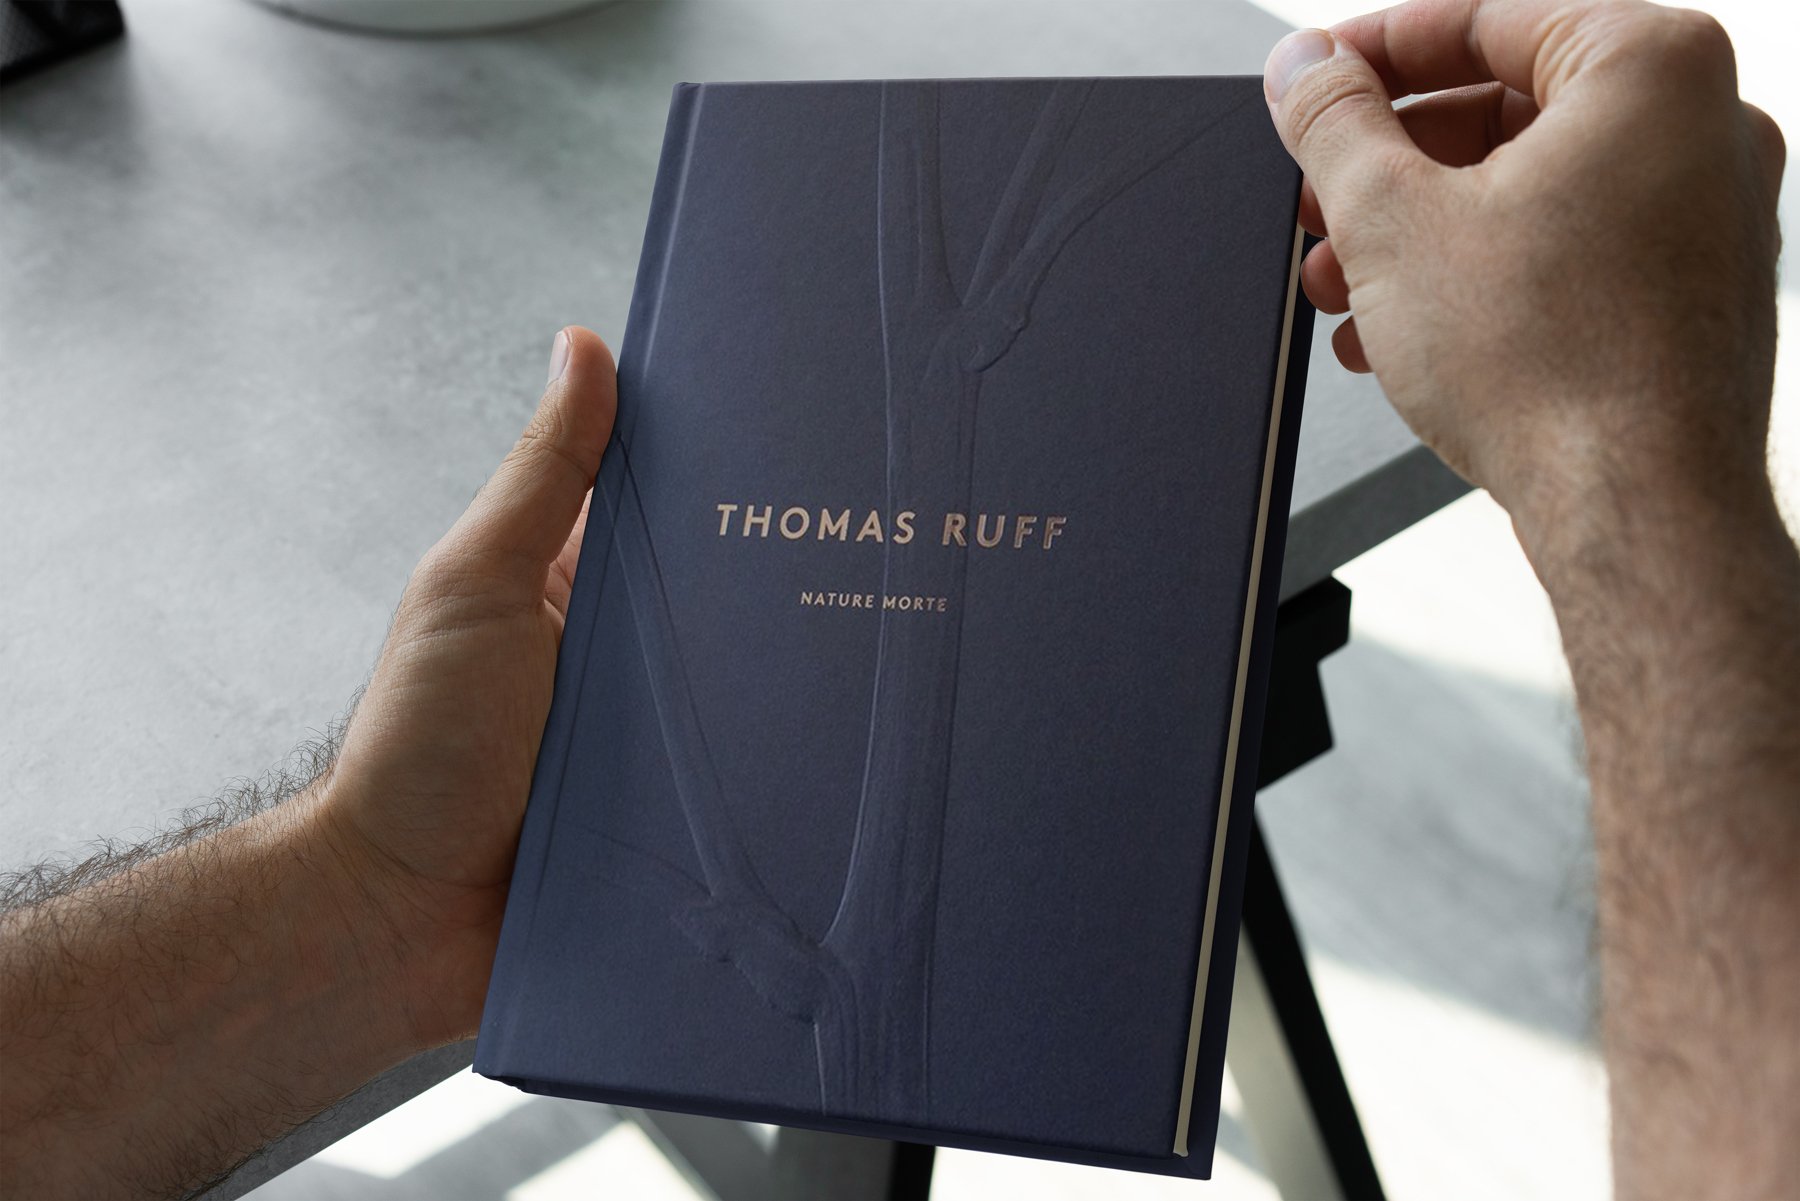 Book Hardcover Lifestyle Mock-Up